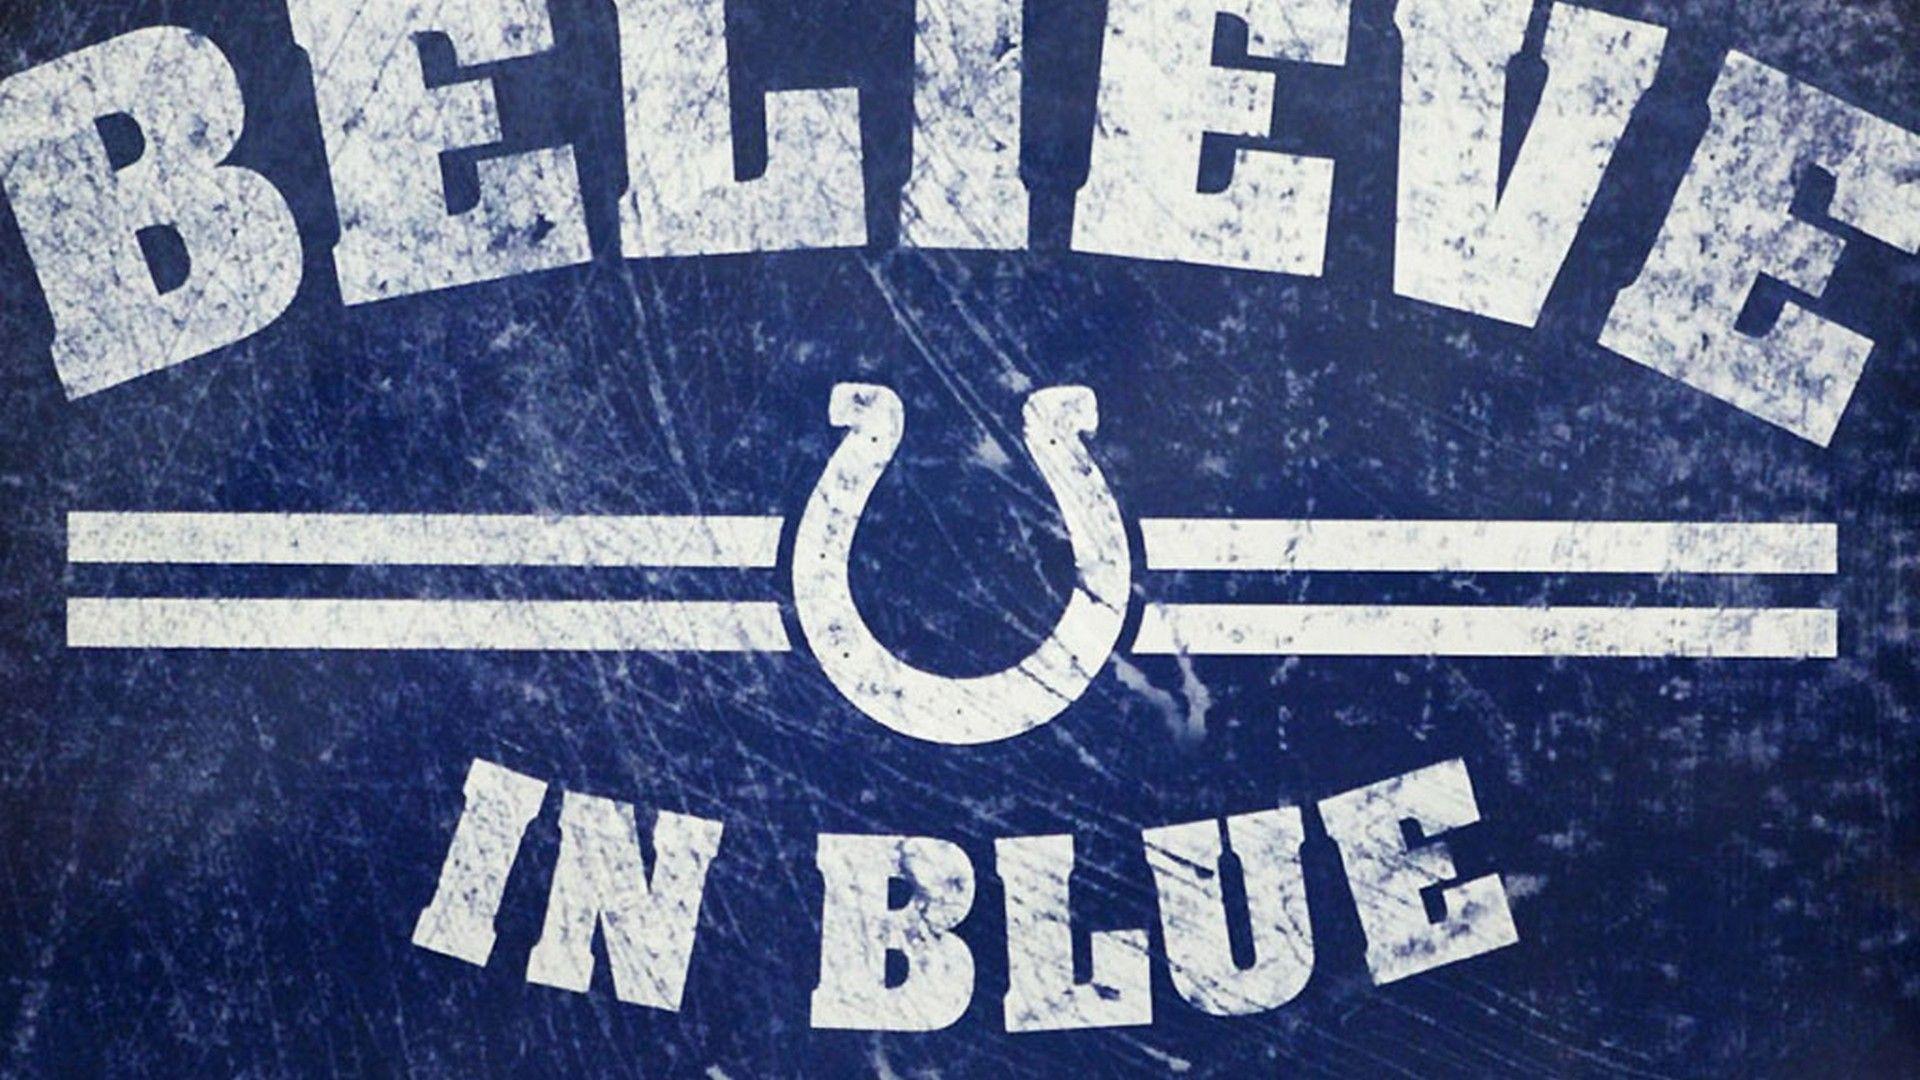 Indianapolis Colts For PC Wallpaper. Wallpaper. Indiana colts